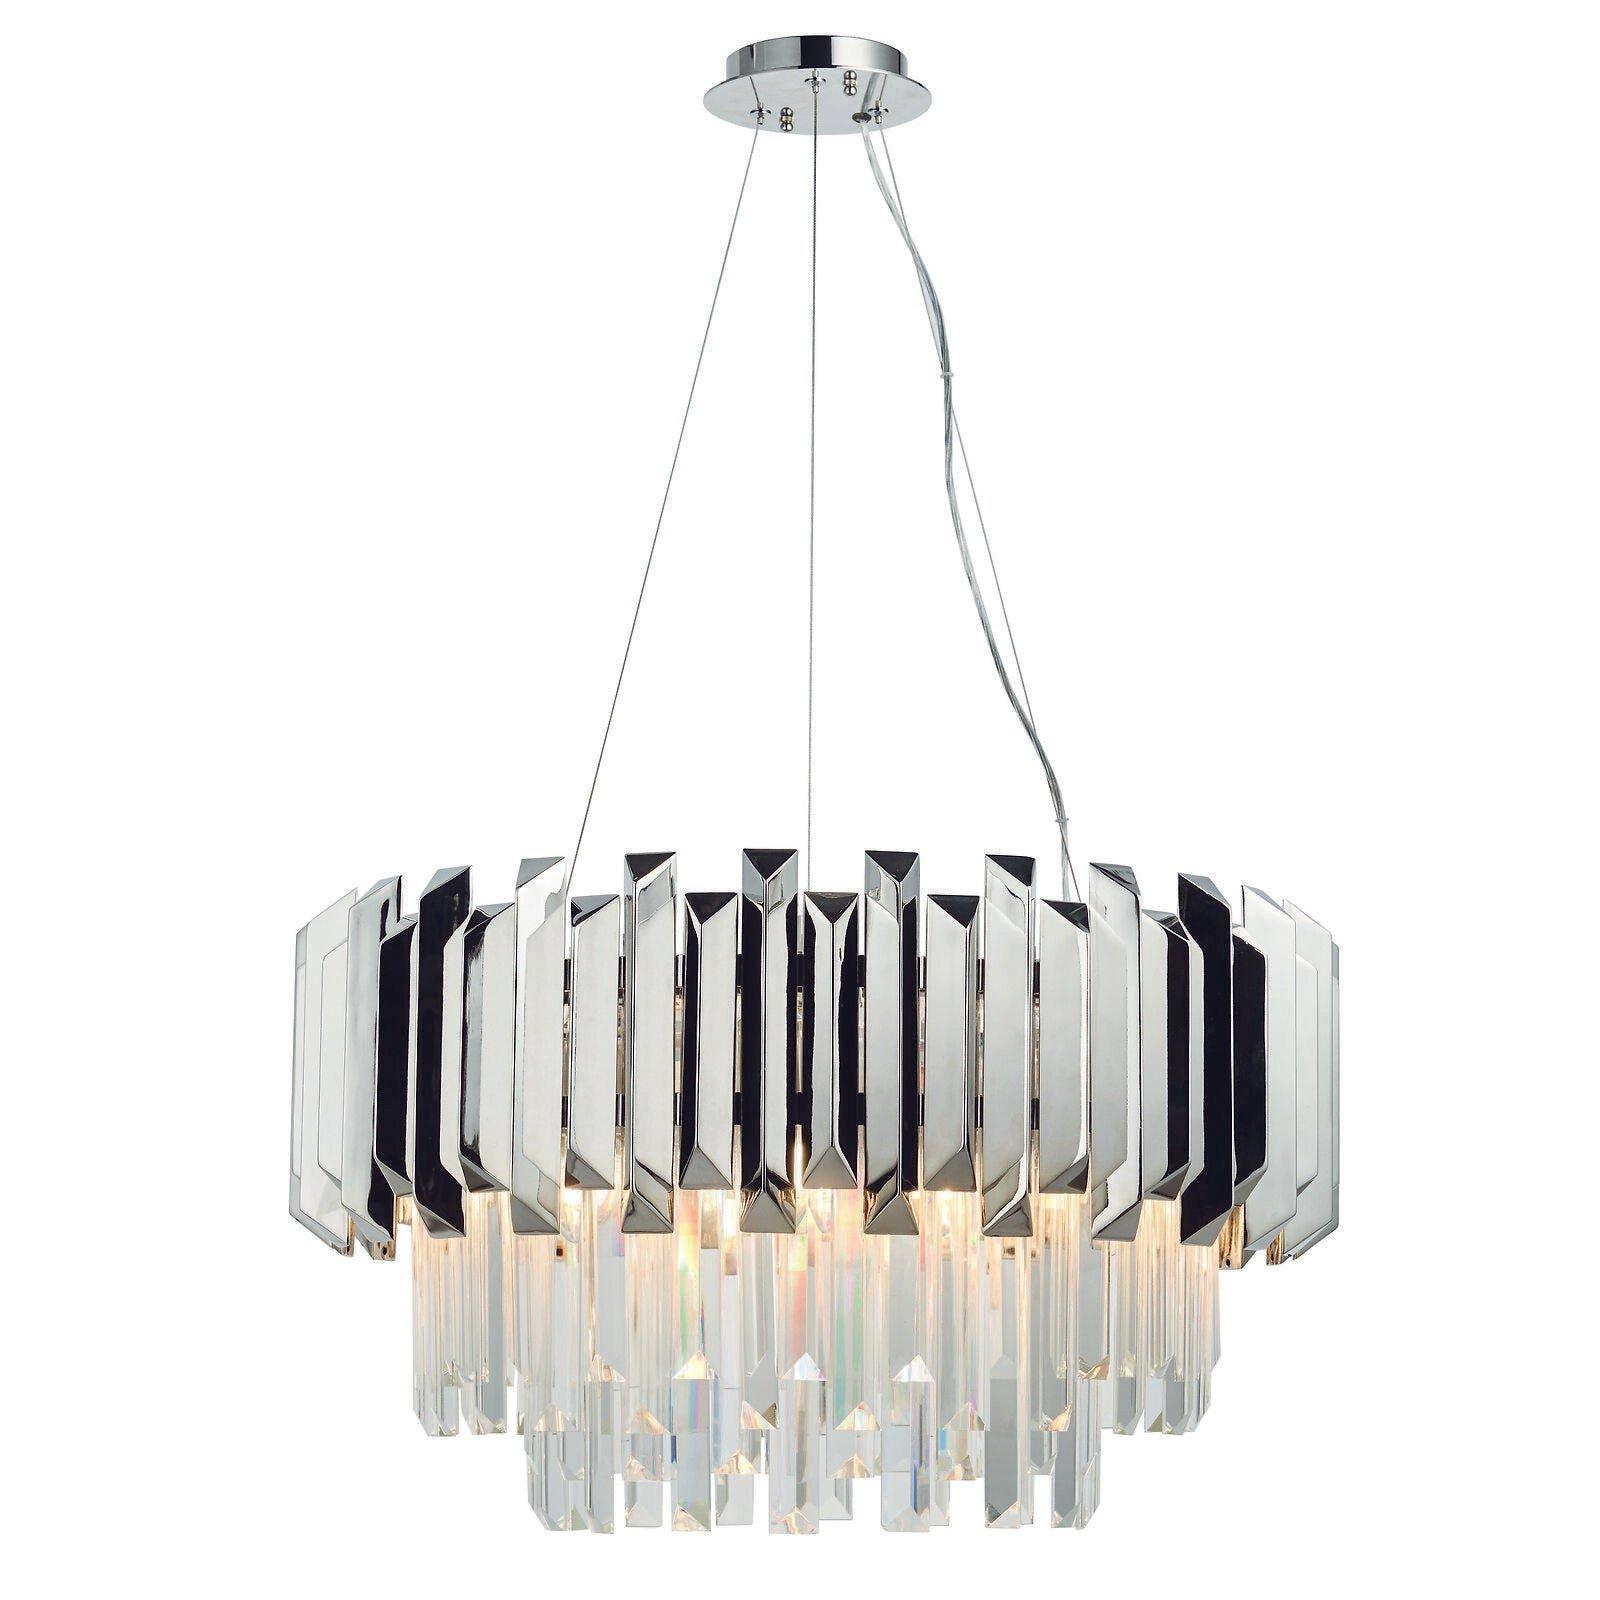 Ceiling Pendant Light Clear Crystal & Polished Stainless Steel 6 x 40W E14